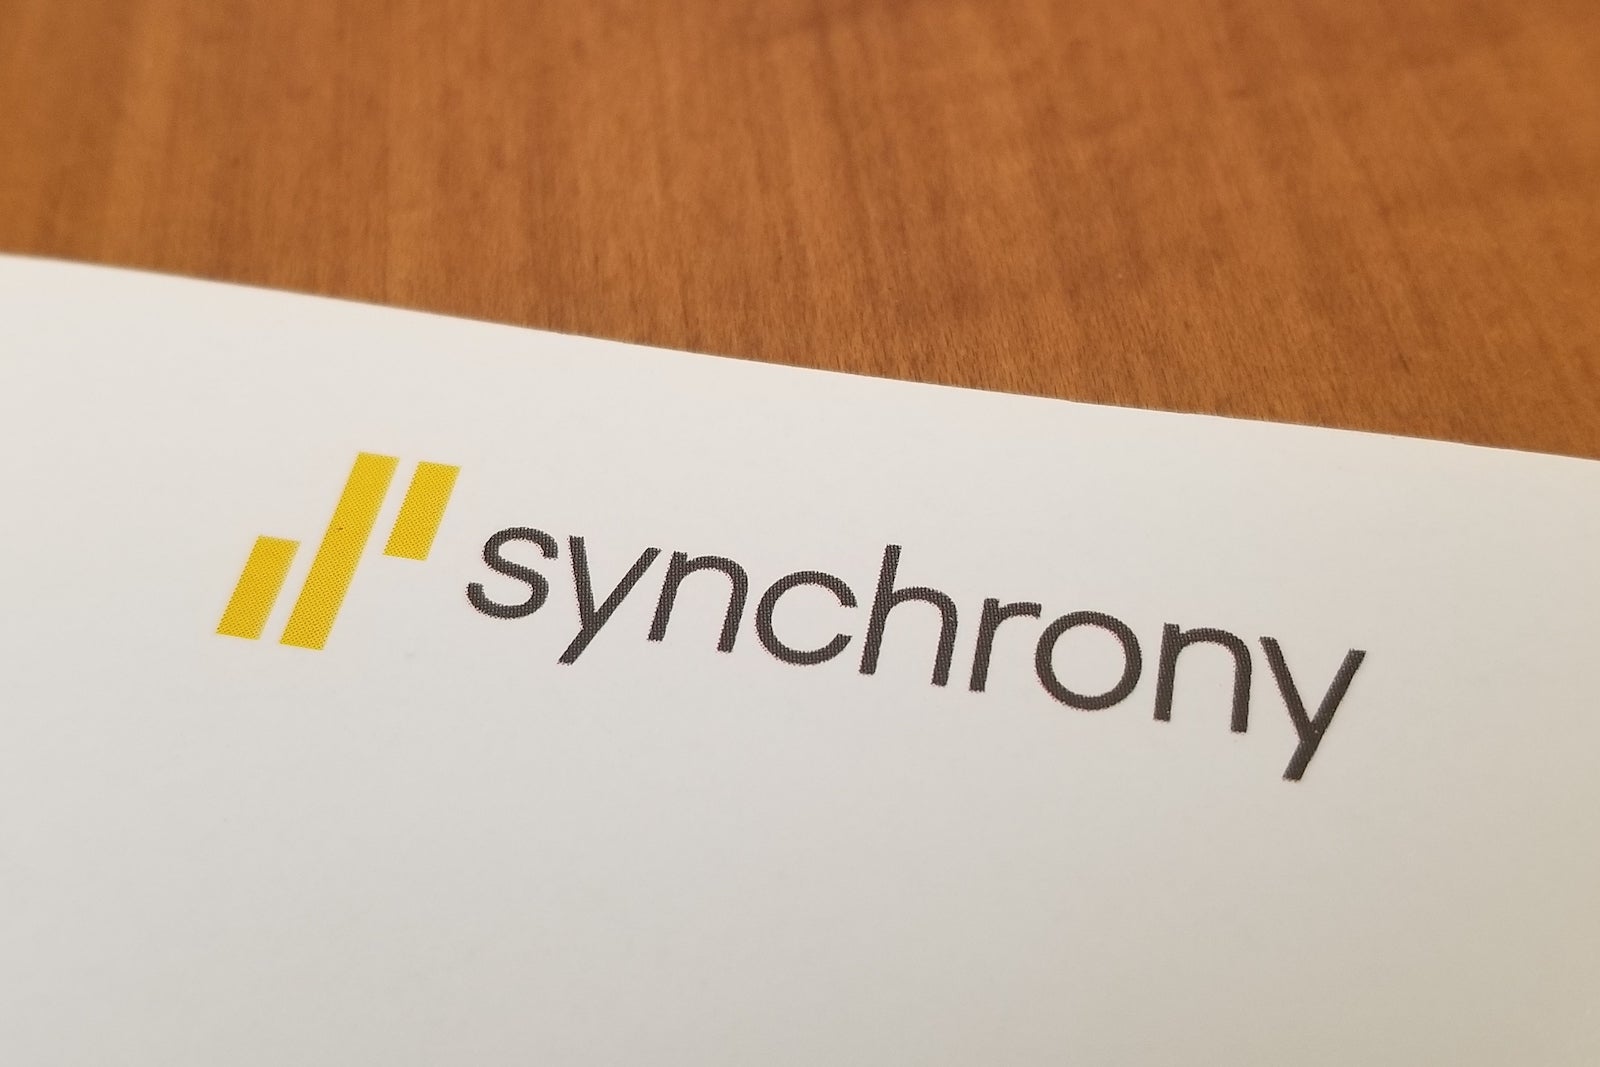 Close-up of logo for Synchrony Bank on a paper on a light wooden surface, July 10, 2019. (Photo by Smith Collection/Gado/Getty Images)